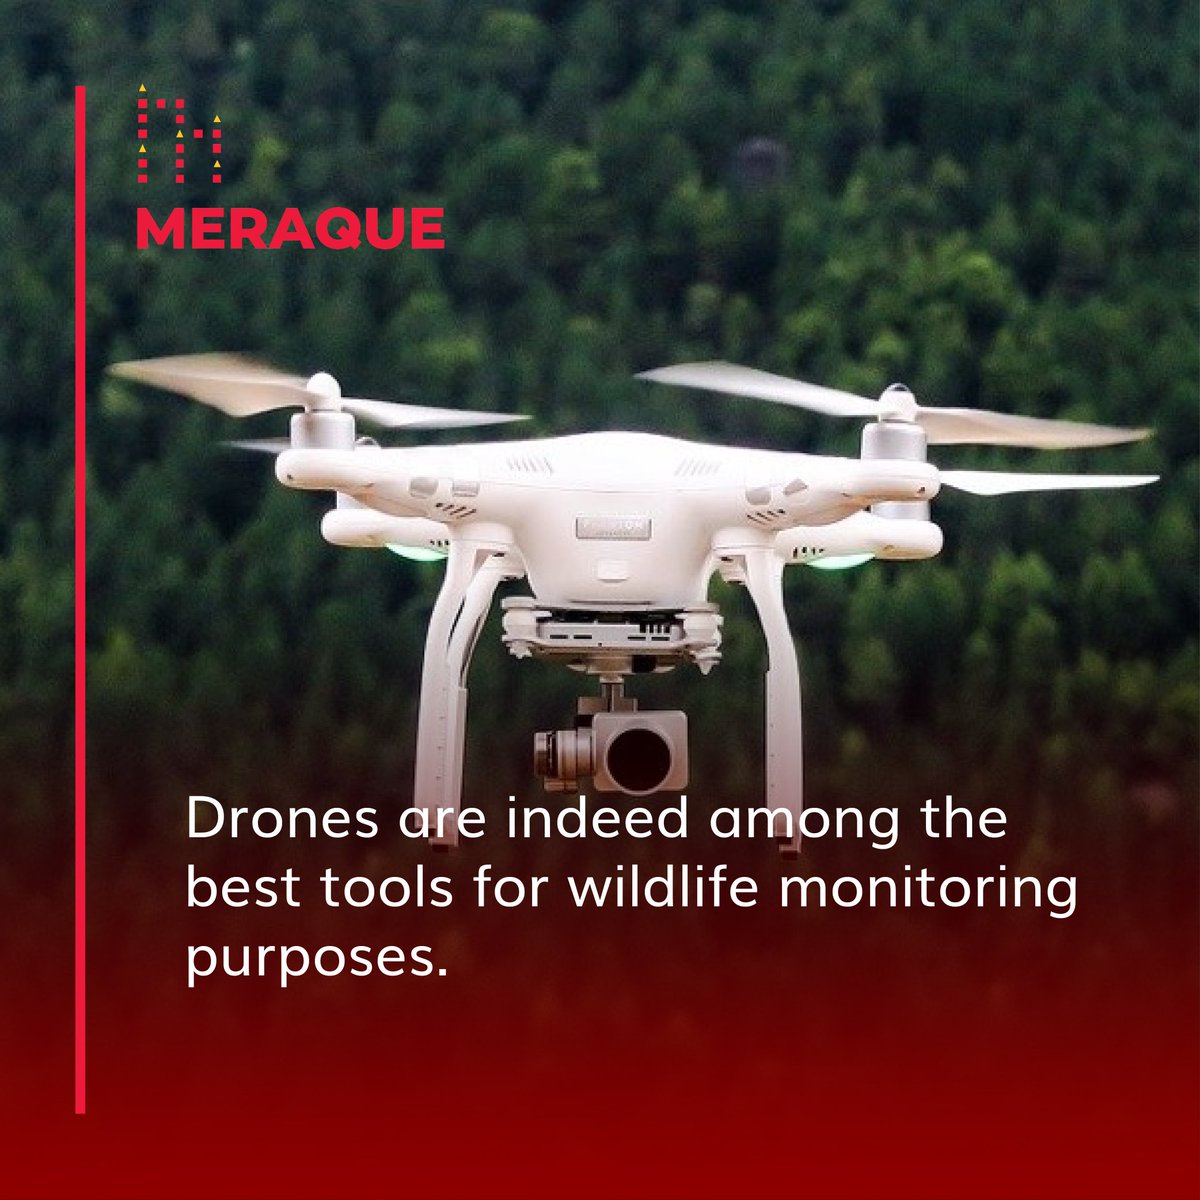 If you find this interesting, retweet it and follow us for more content on drones and technology.

#koalas #dronestechnology #wildlife